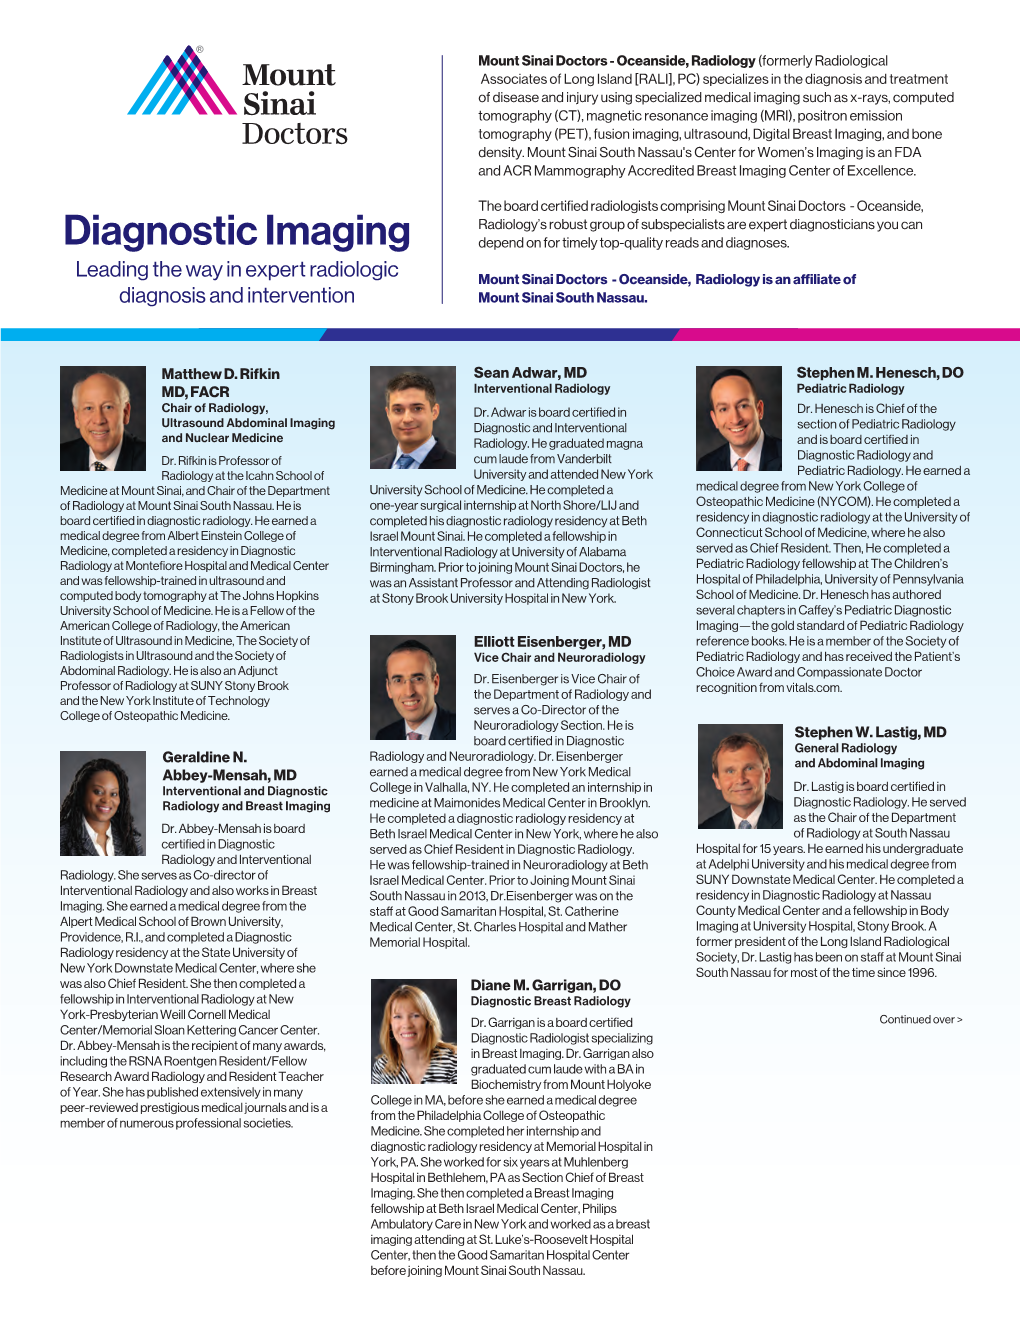 Diagnostic Imaging Depend on for Timely Top-Quality Reads and Diagnoses